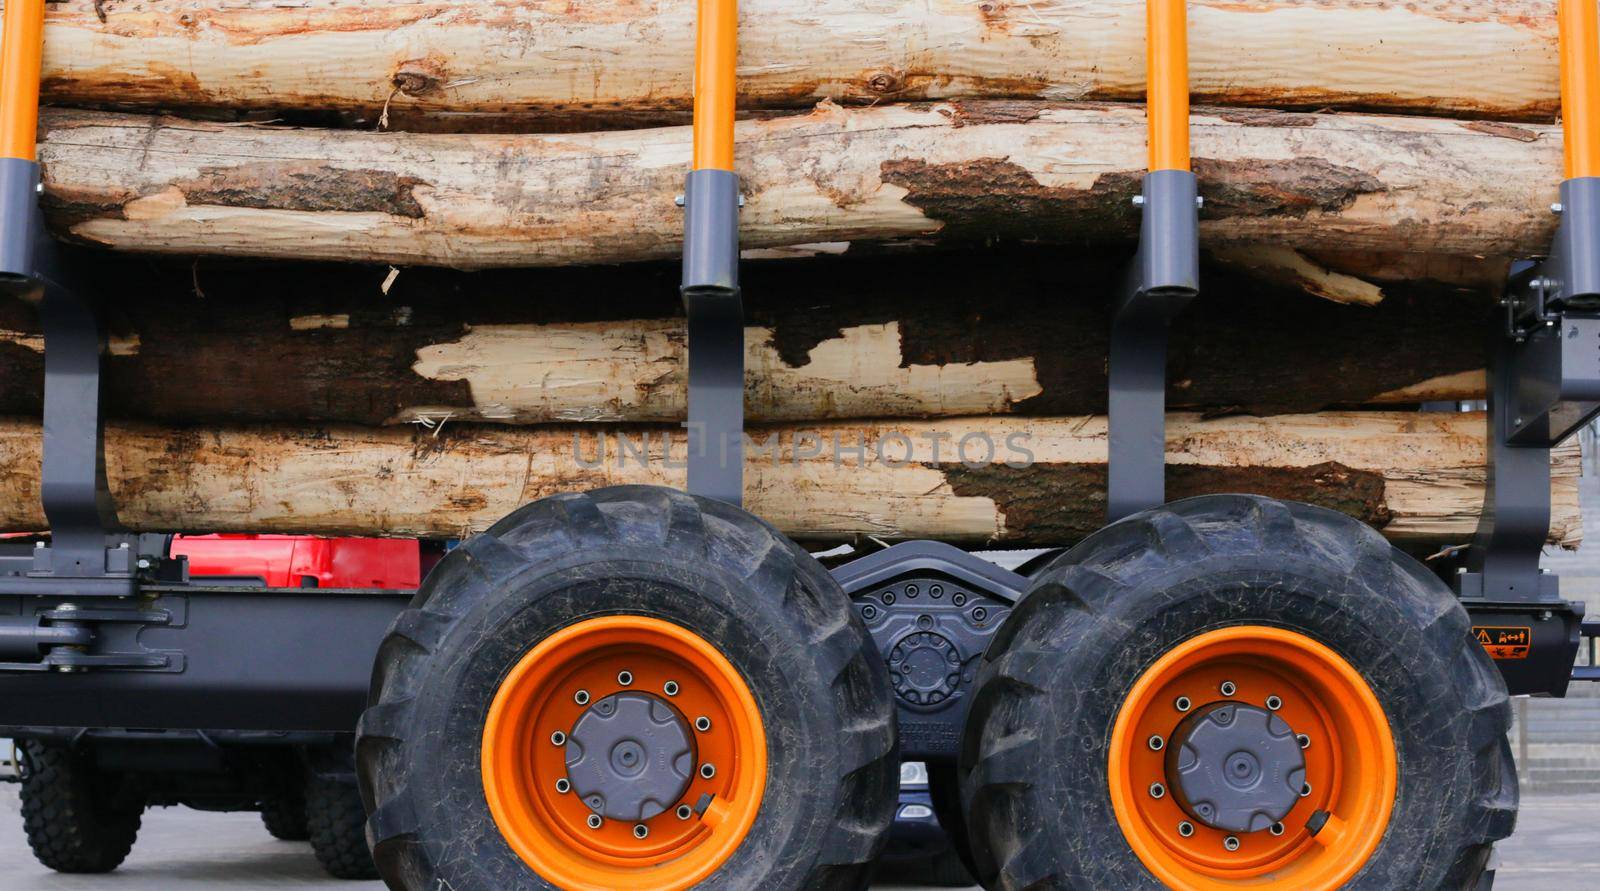 Large logs close-up on a lumber truck. by gelog67